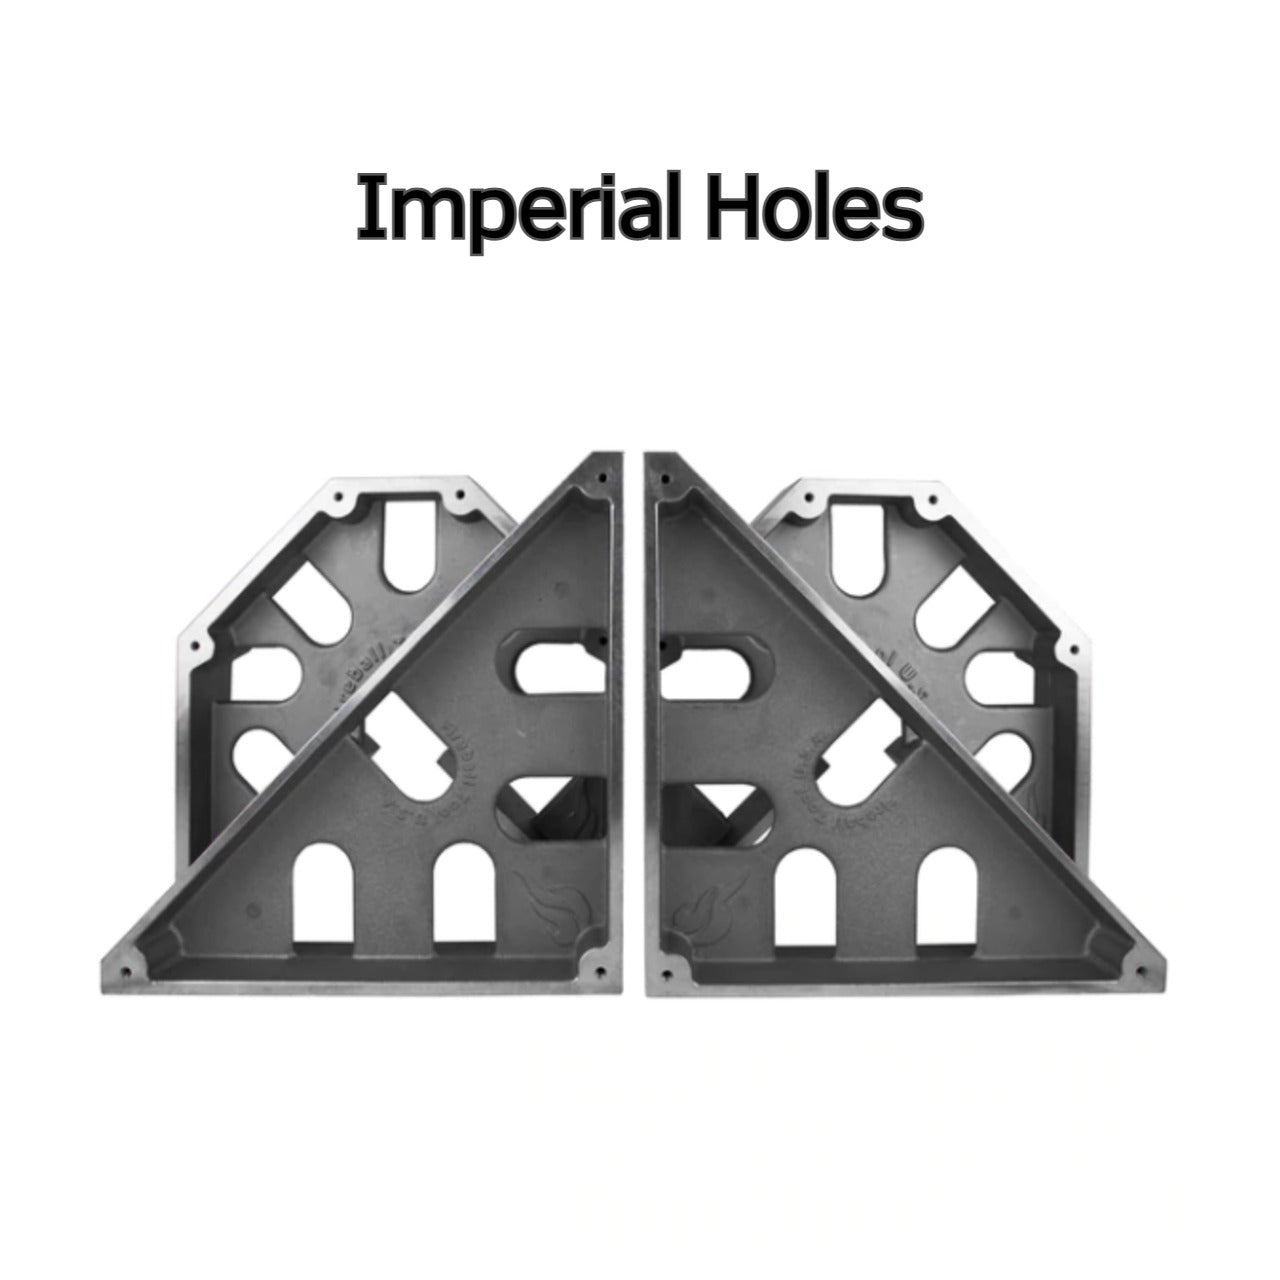 Fabricator Package 12" Cast Iron (Imperial Holes)